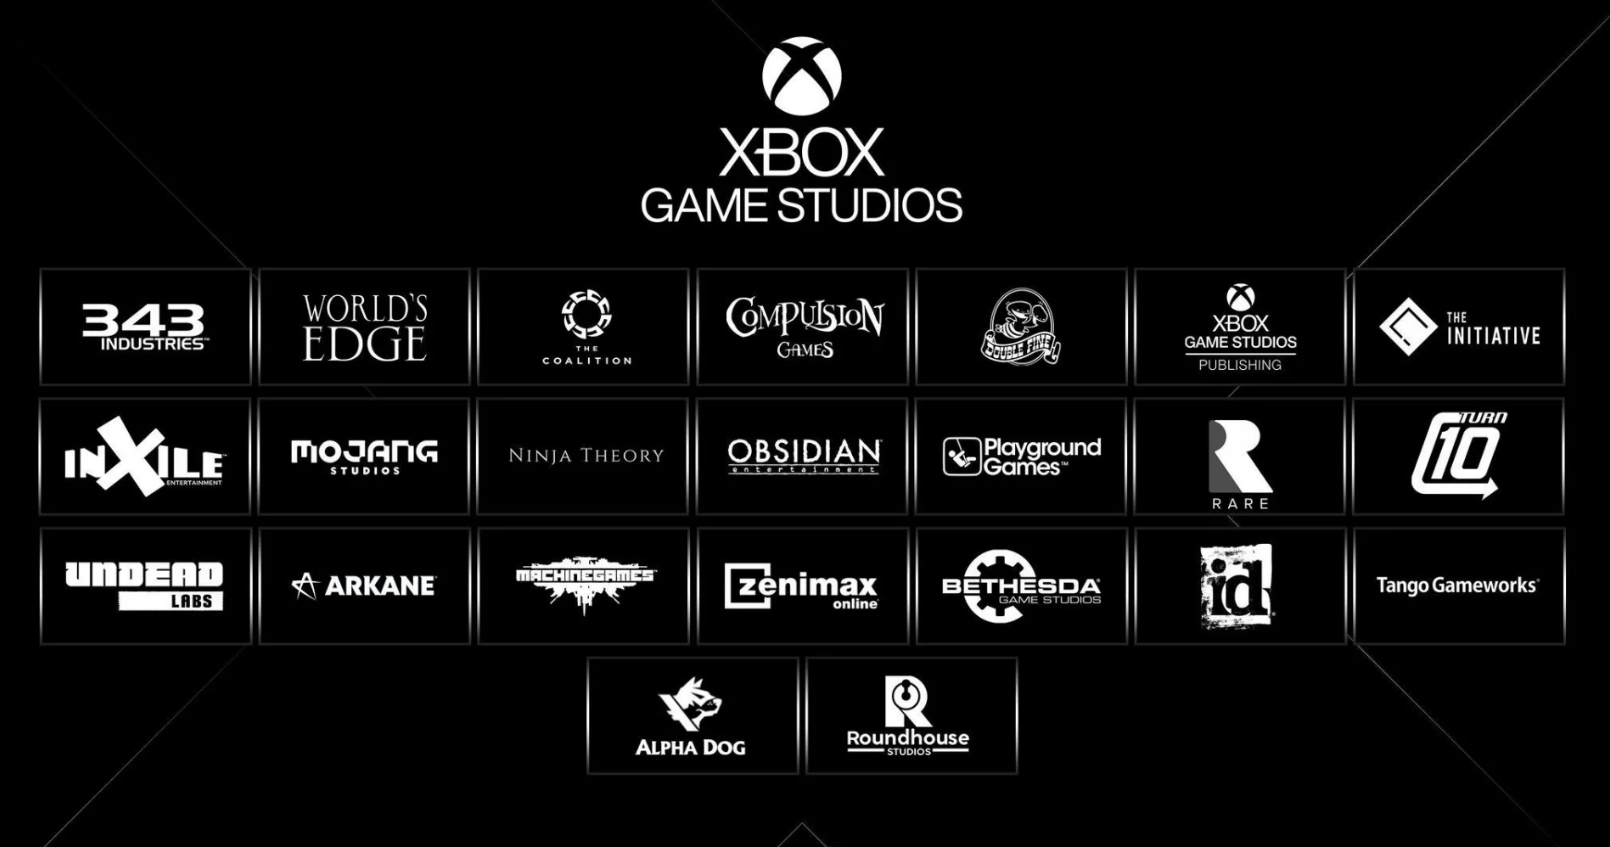 Microsoft Boasts A Powerhouse Collection Of Studios Under Its Name